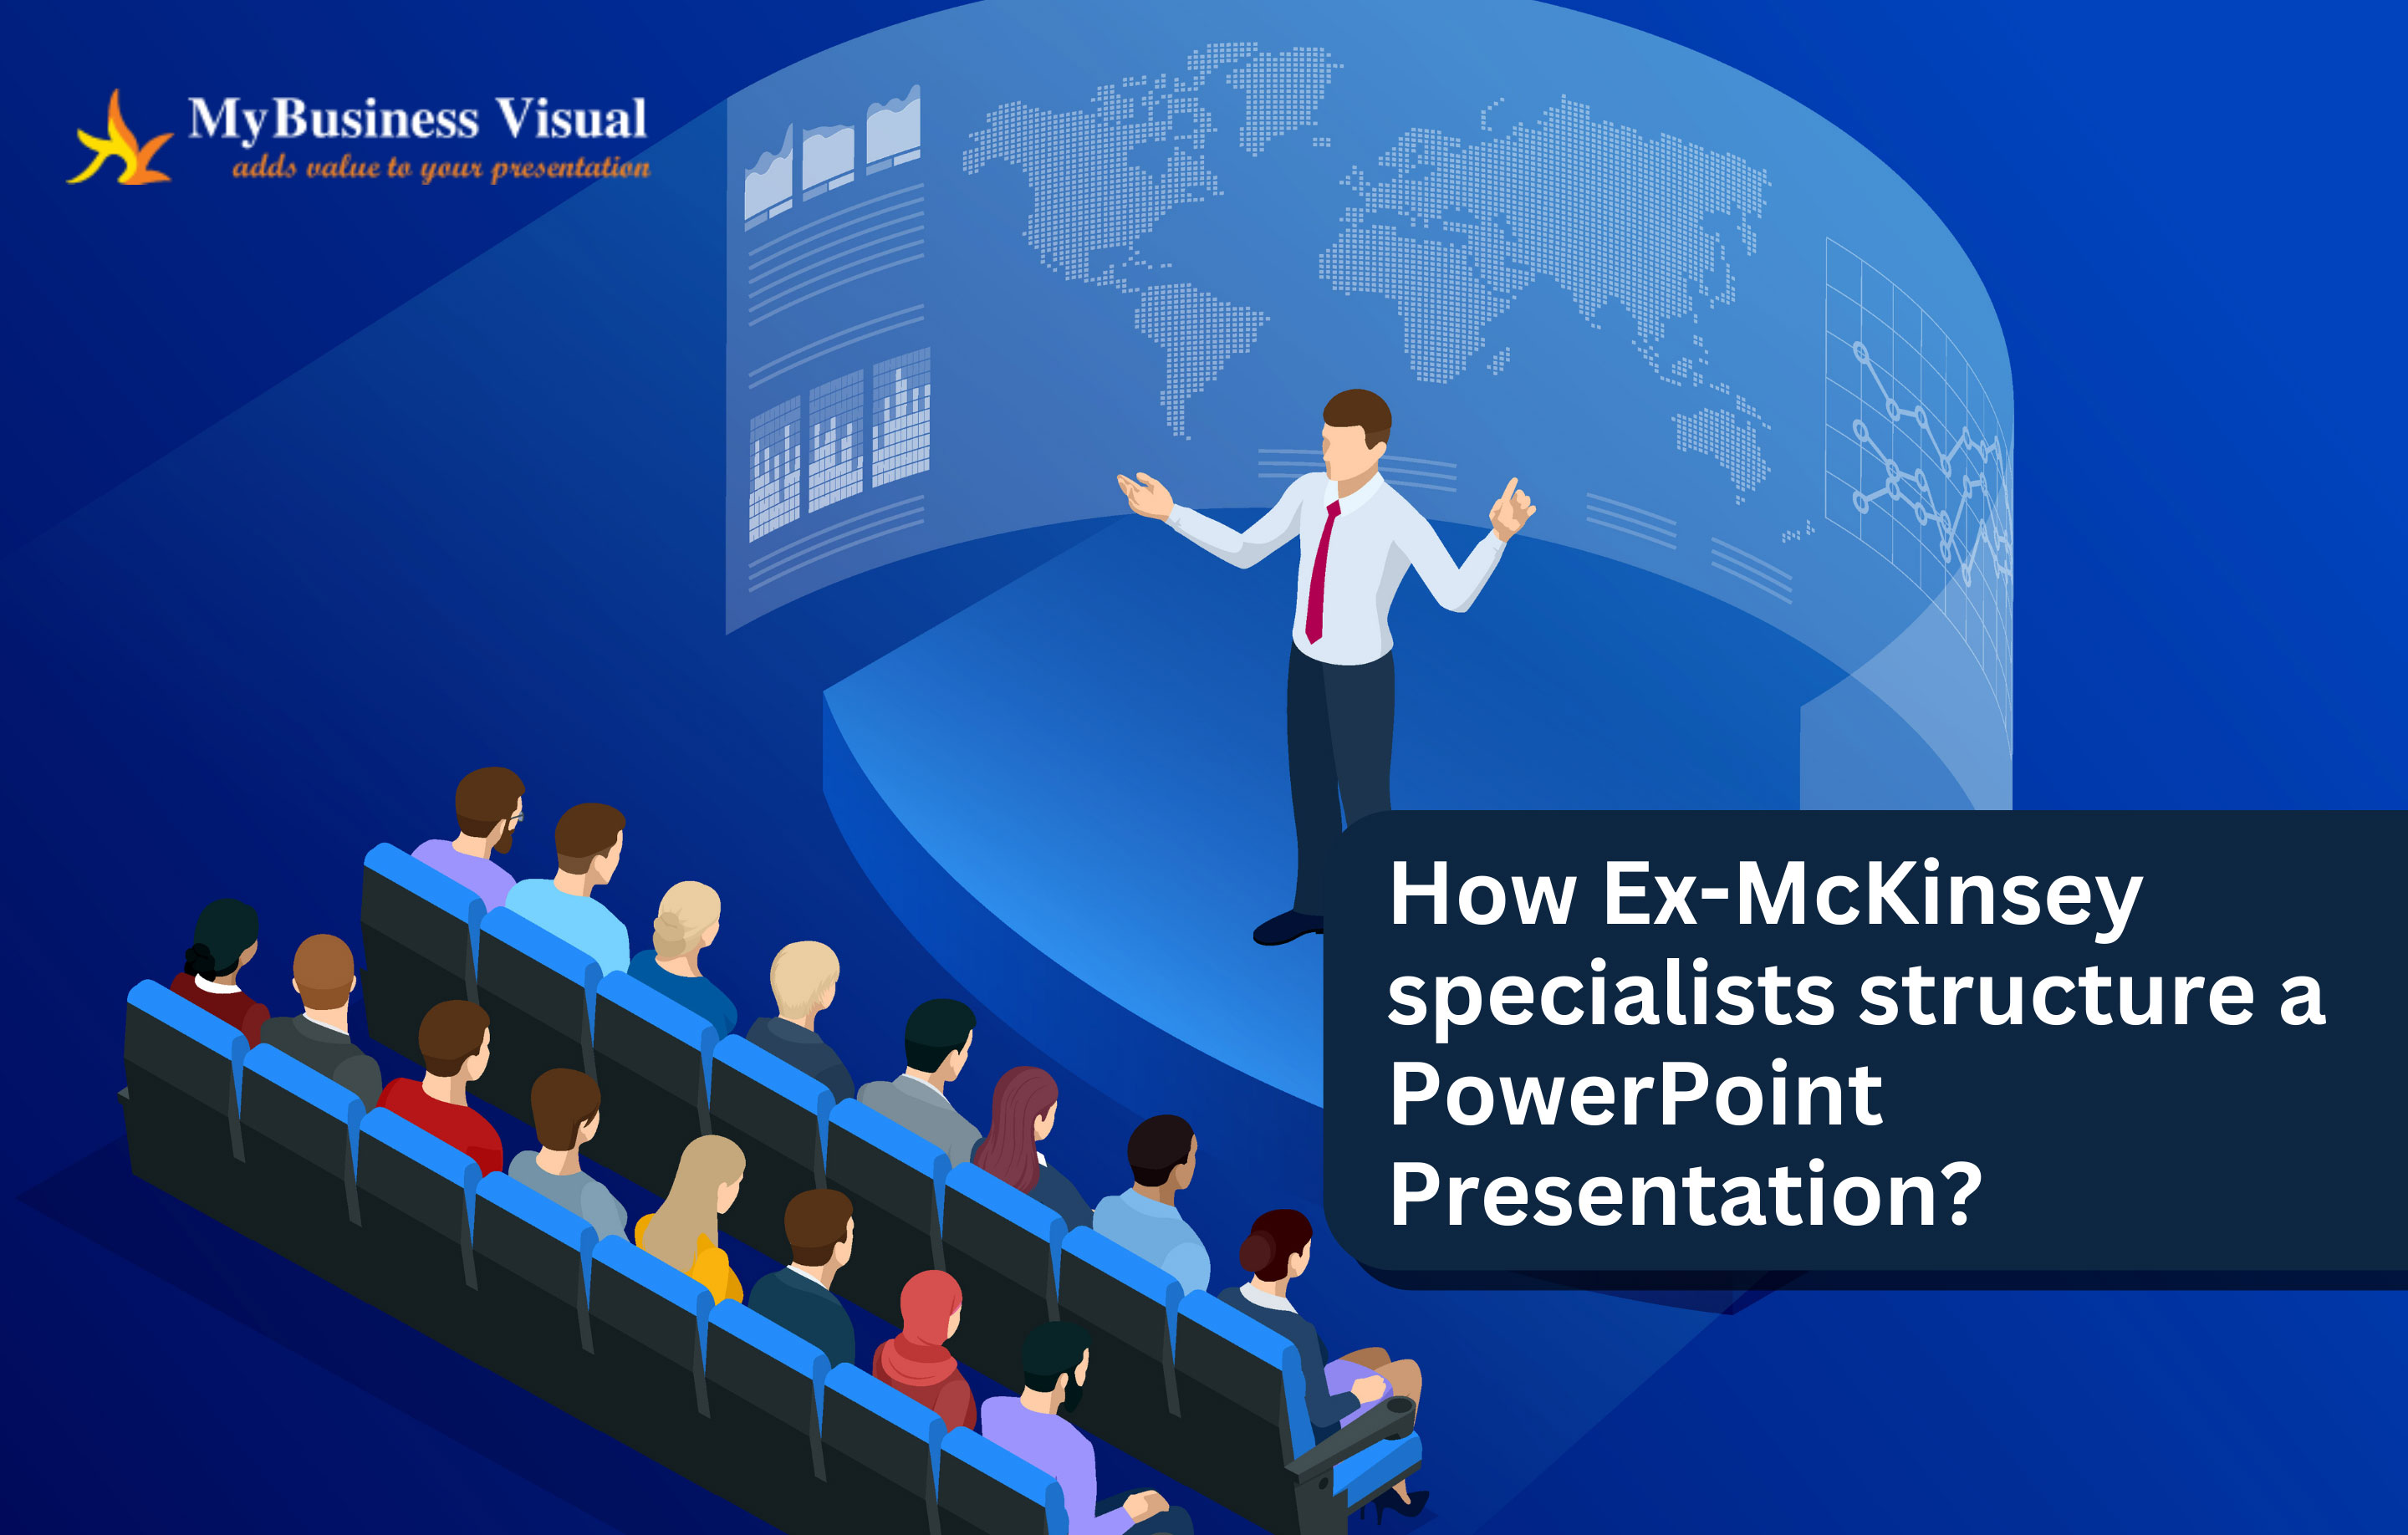 How to present presentation to different types of audiences